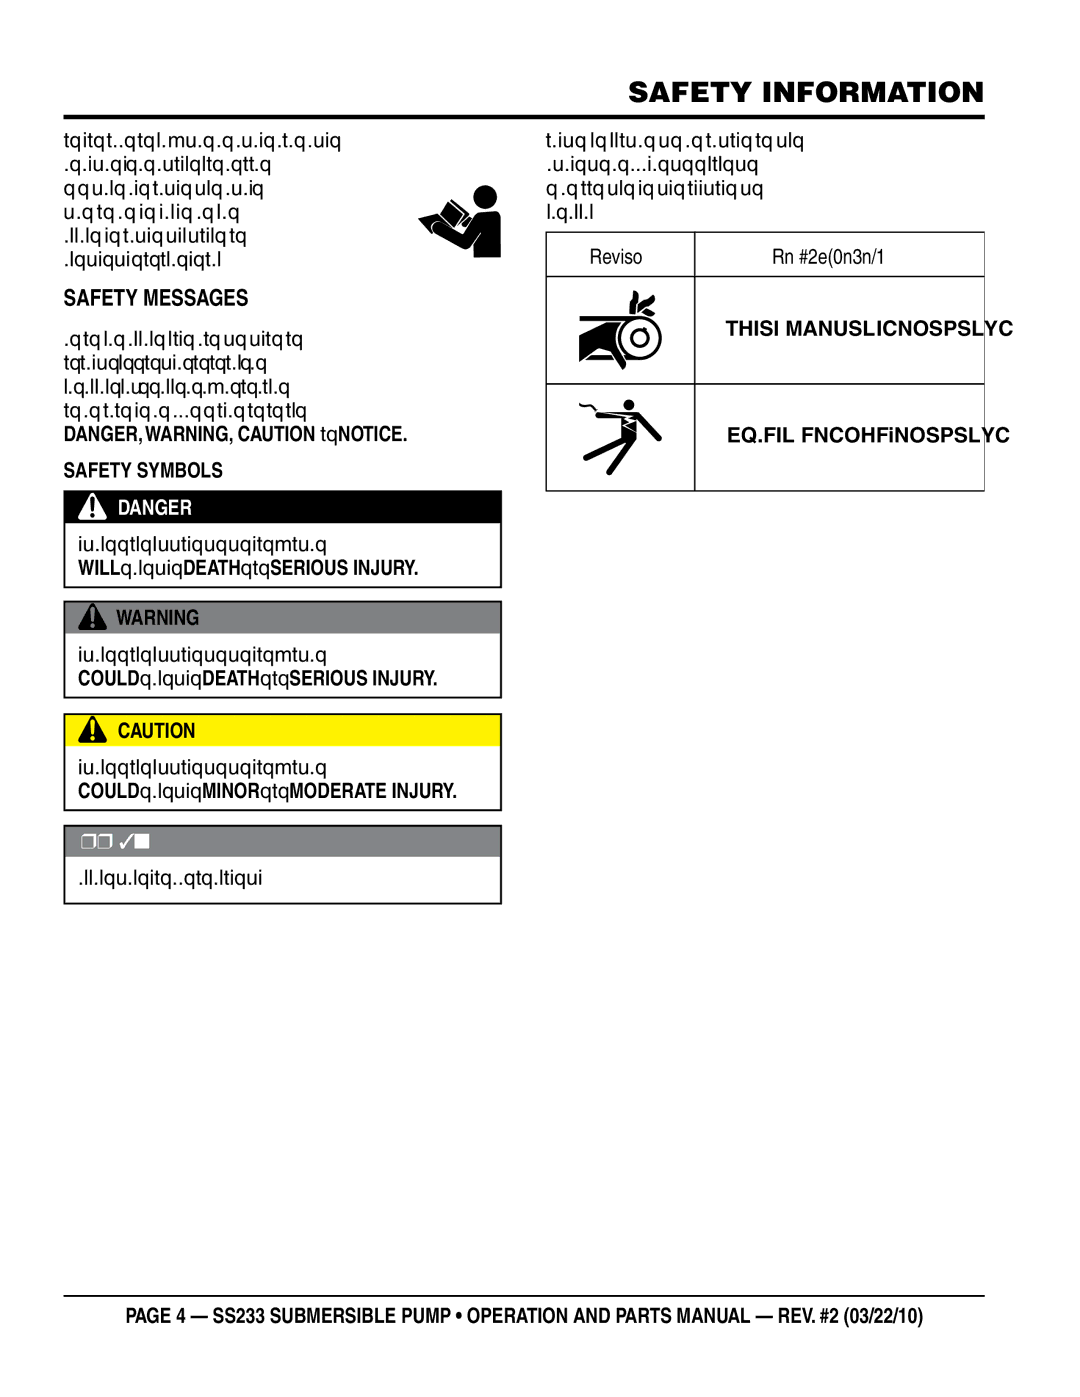 Multiquip SS233 manual Safety Information, SaFeTY meSSageS 